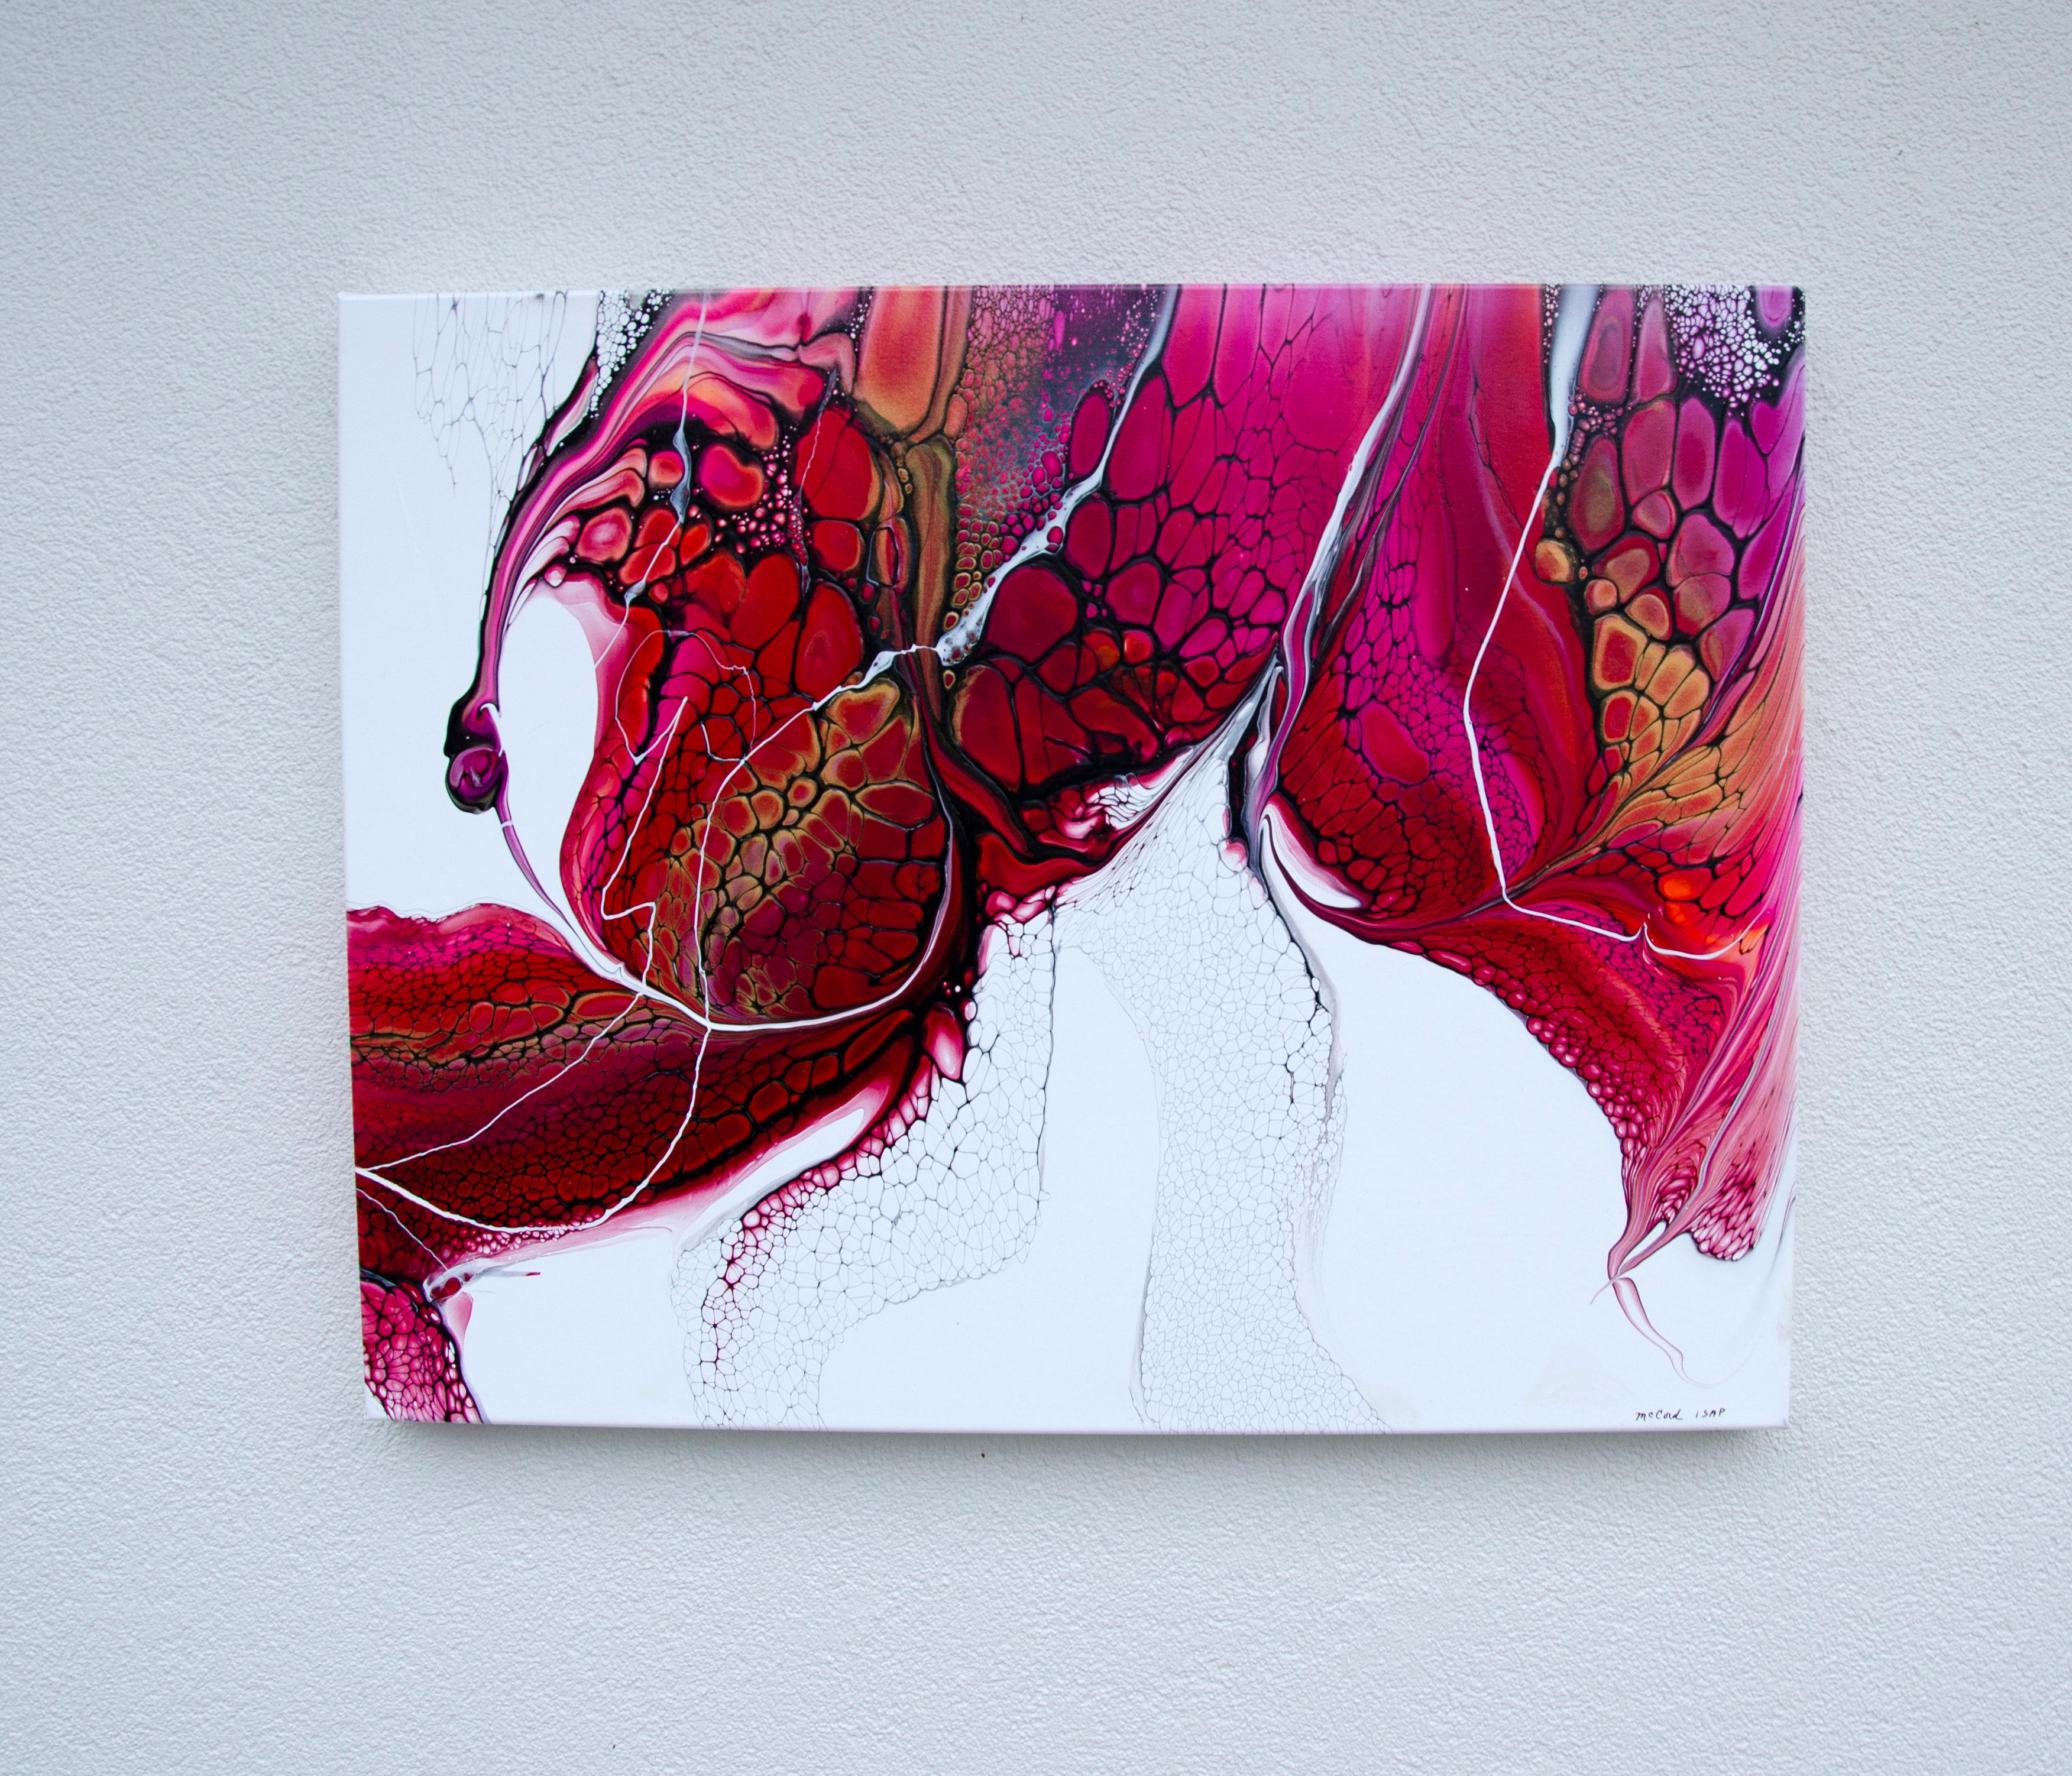 <p>Artist Comments<br>This abstract painting features vibrant red, pink, and orange hues. Black cells form organic shapes that infuse the composition with a sense of fluidity and dynamic energy. The artwork, made with the acrylic pouring method, is